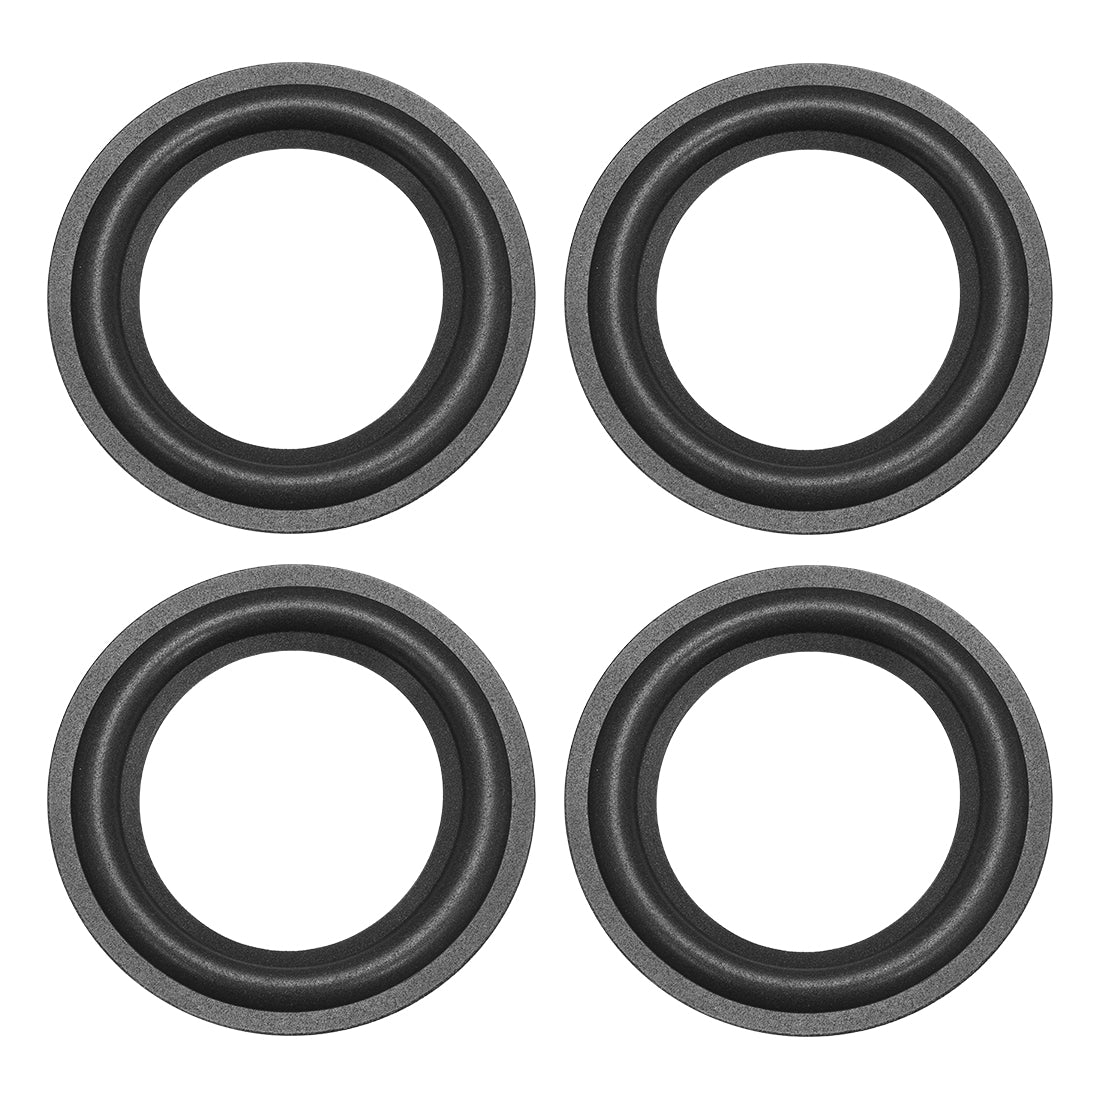 uxcell Uxcell 4.5" 4.5 inch Speaker Foam Edge Surround Rings Replacement for Speaker Repair or DIY 4pcs